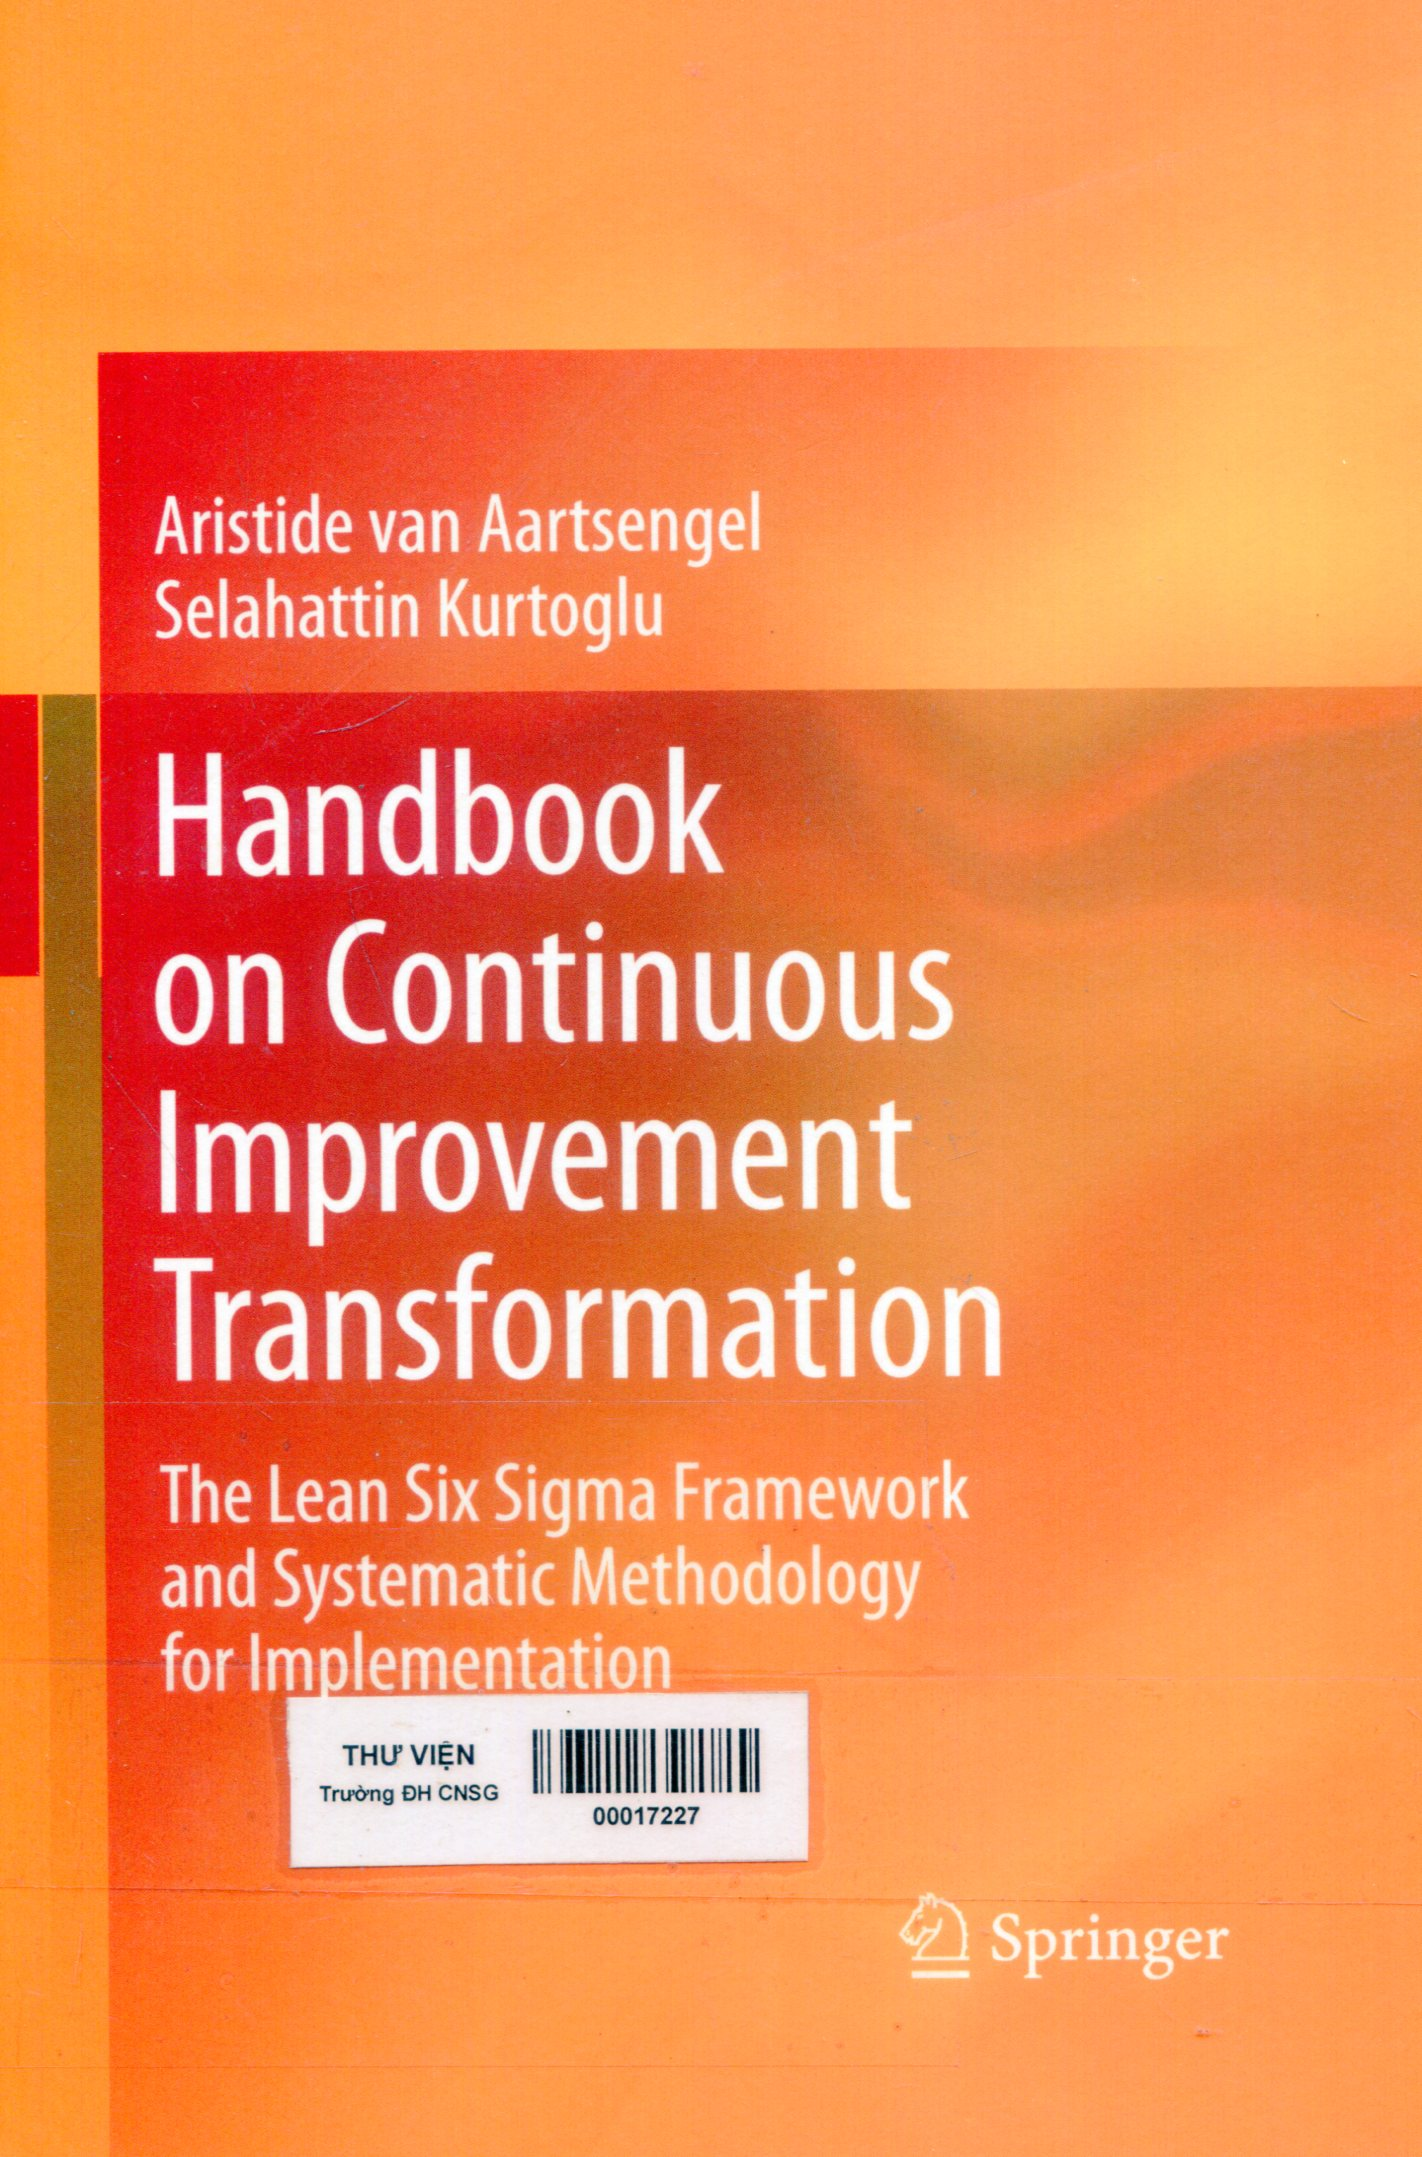 Handbook on continuous improvement transformation : the lean six sigma framework and systematic methodology for implementation